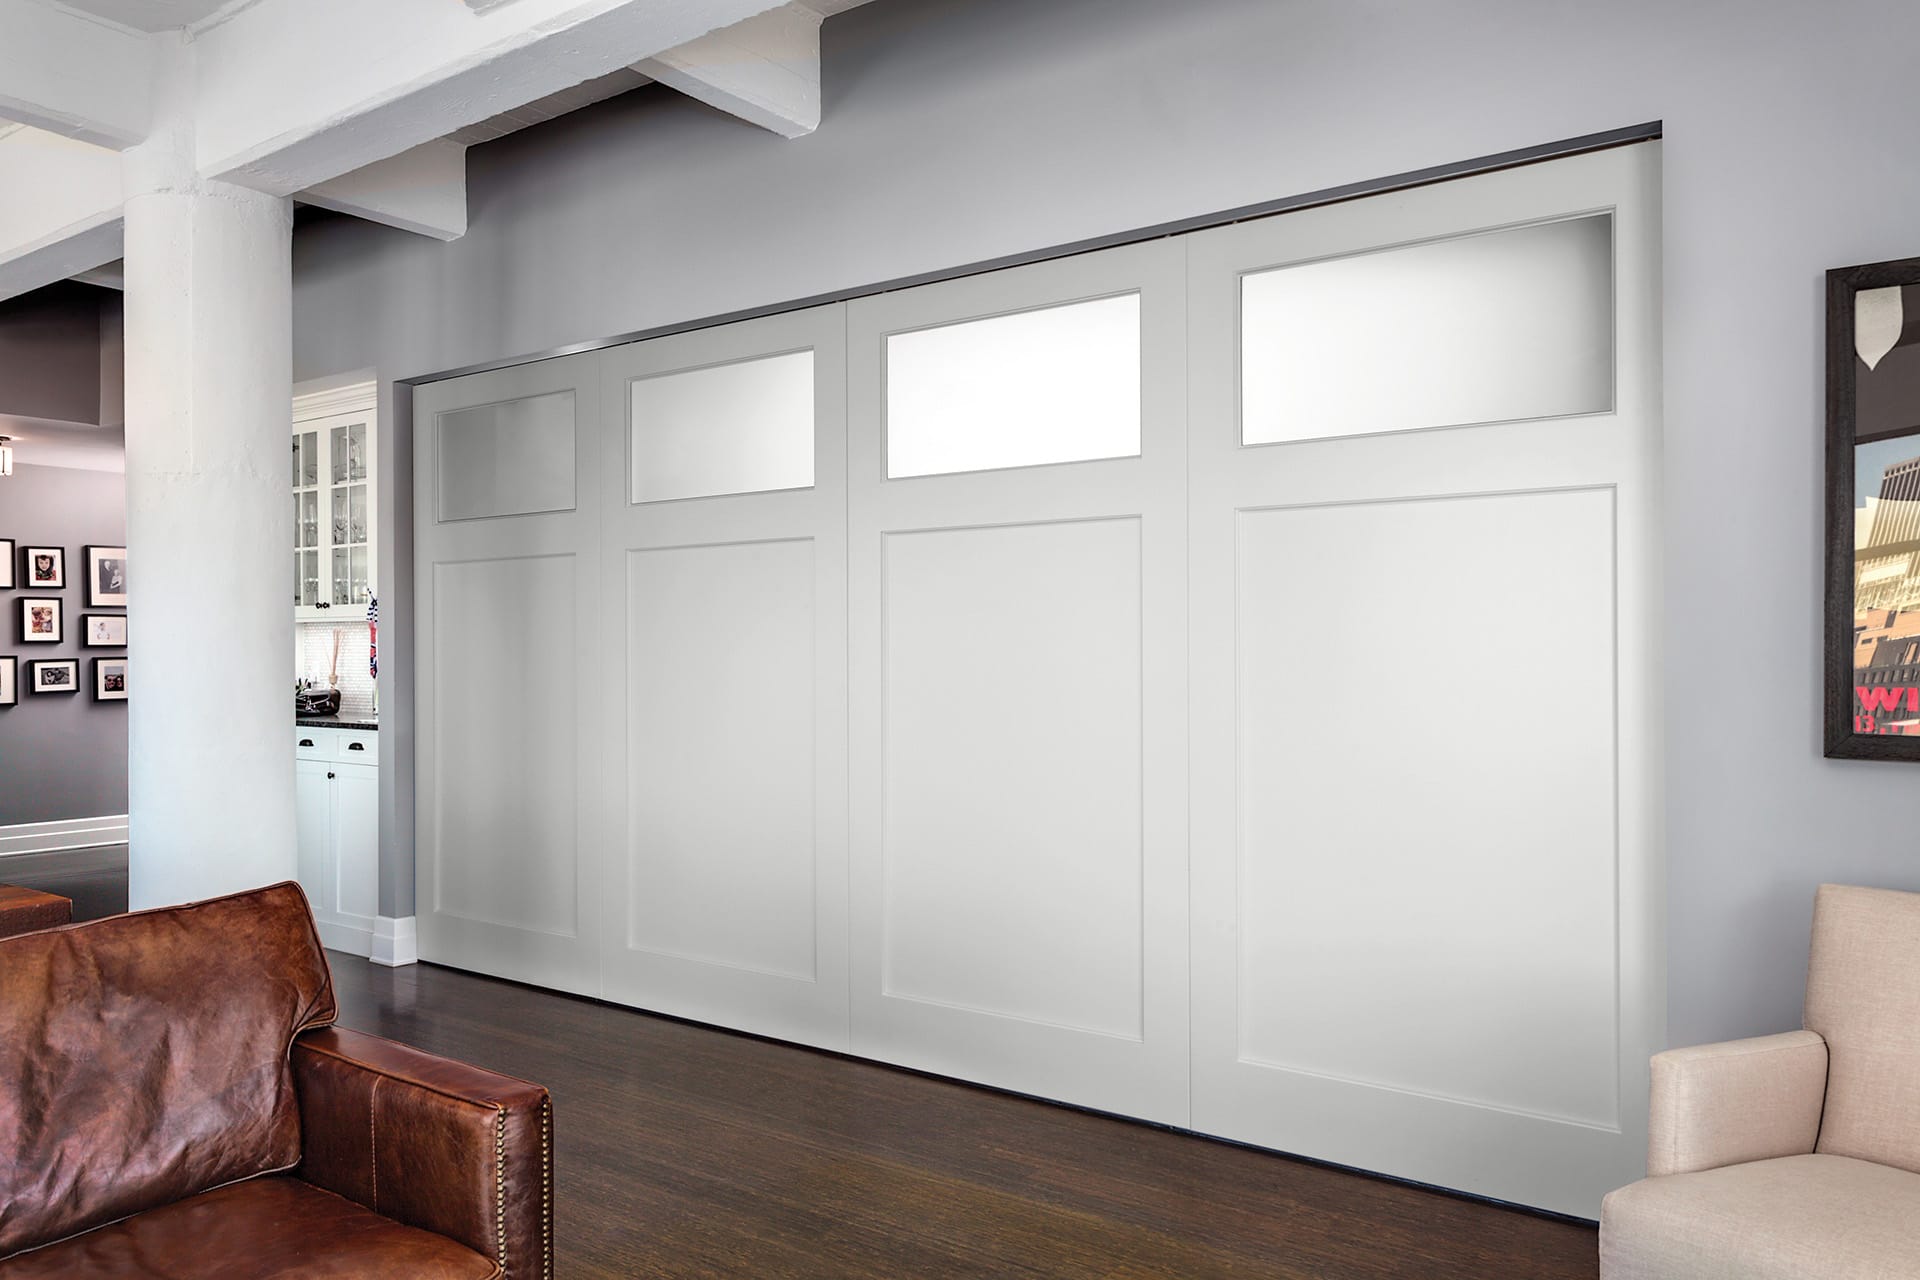 Four large pocket doors conceal an entertainment room from the living space adjacent to it.